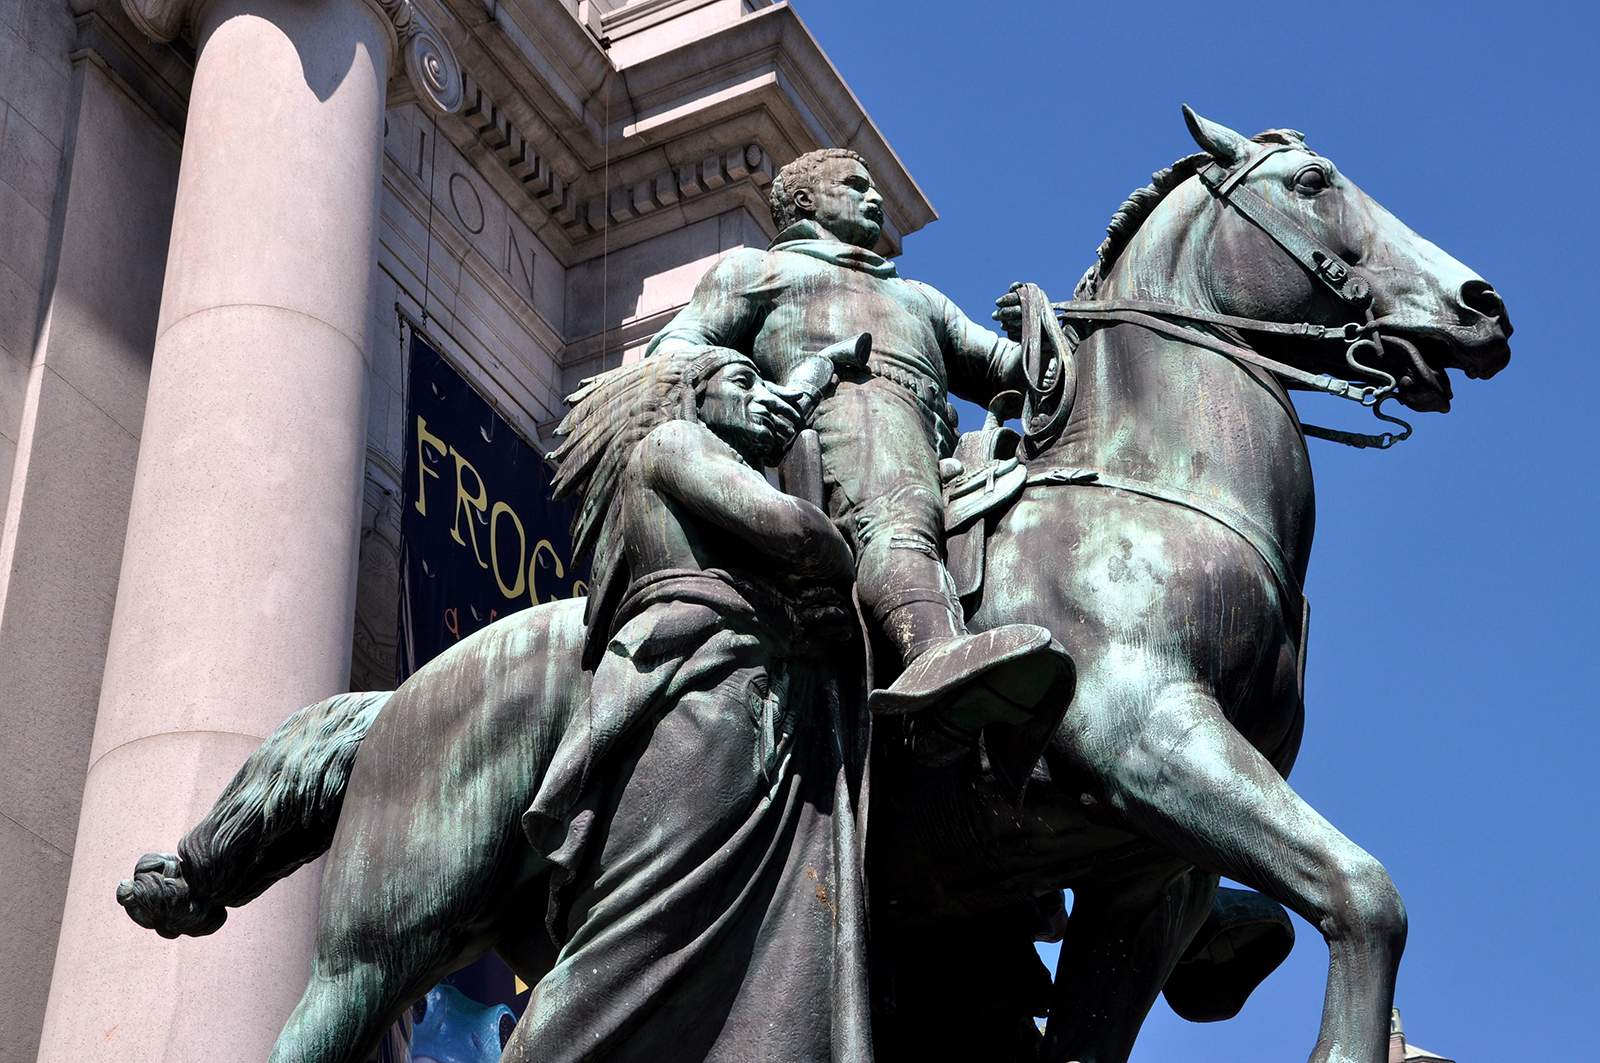 Statue of Theodore Roosevelt to be removed from American Museum of Natural History